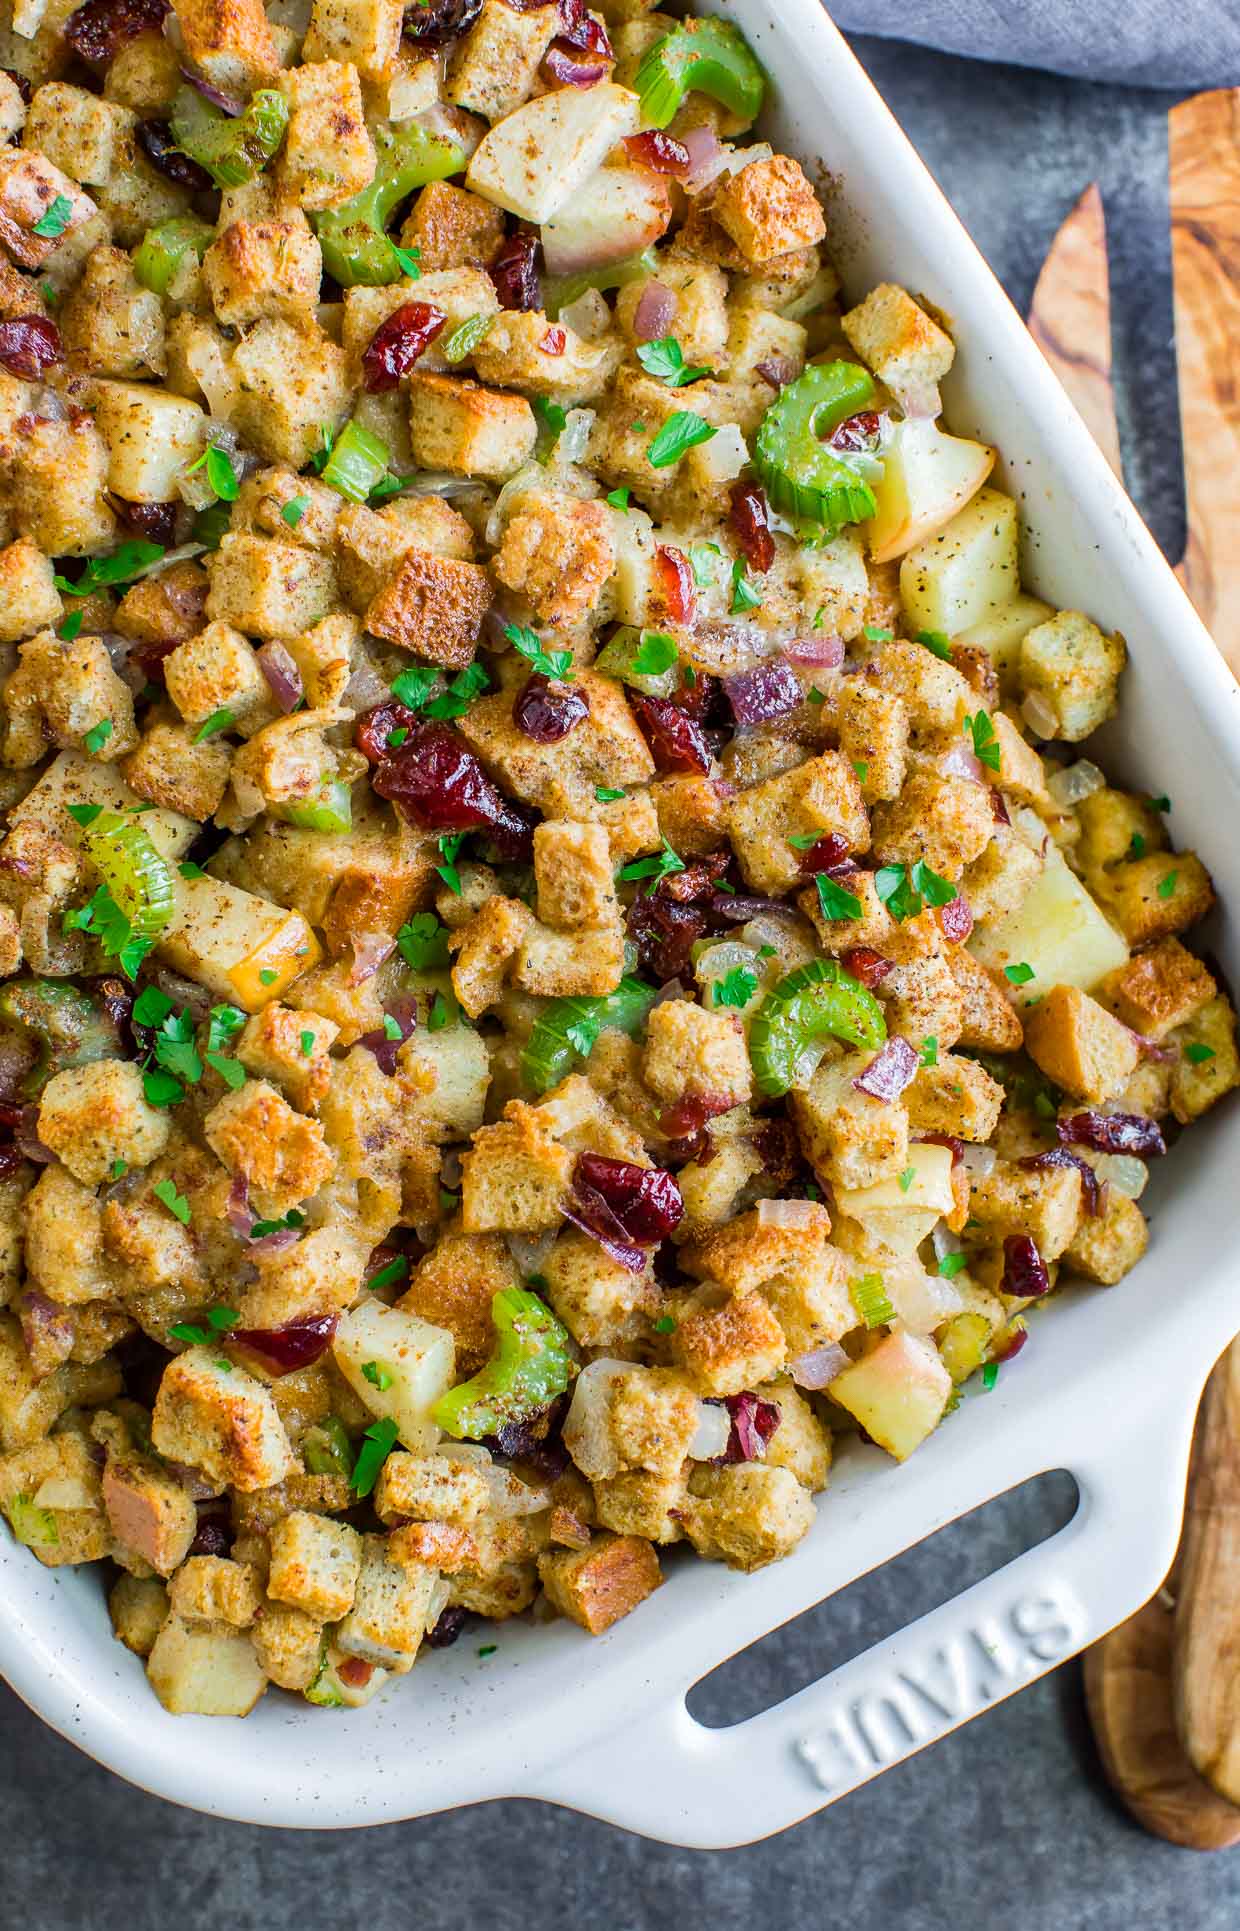 This sweet and savory baked apple cranberry stuffing combines the best of both worlds! Sweet apples and cranberries kissed with cinnamon and baked into a warm Thanksgiving stuffing... it's DELICIOUS.